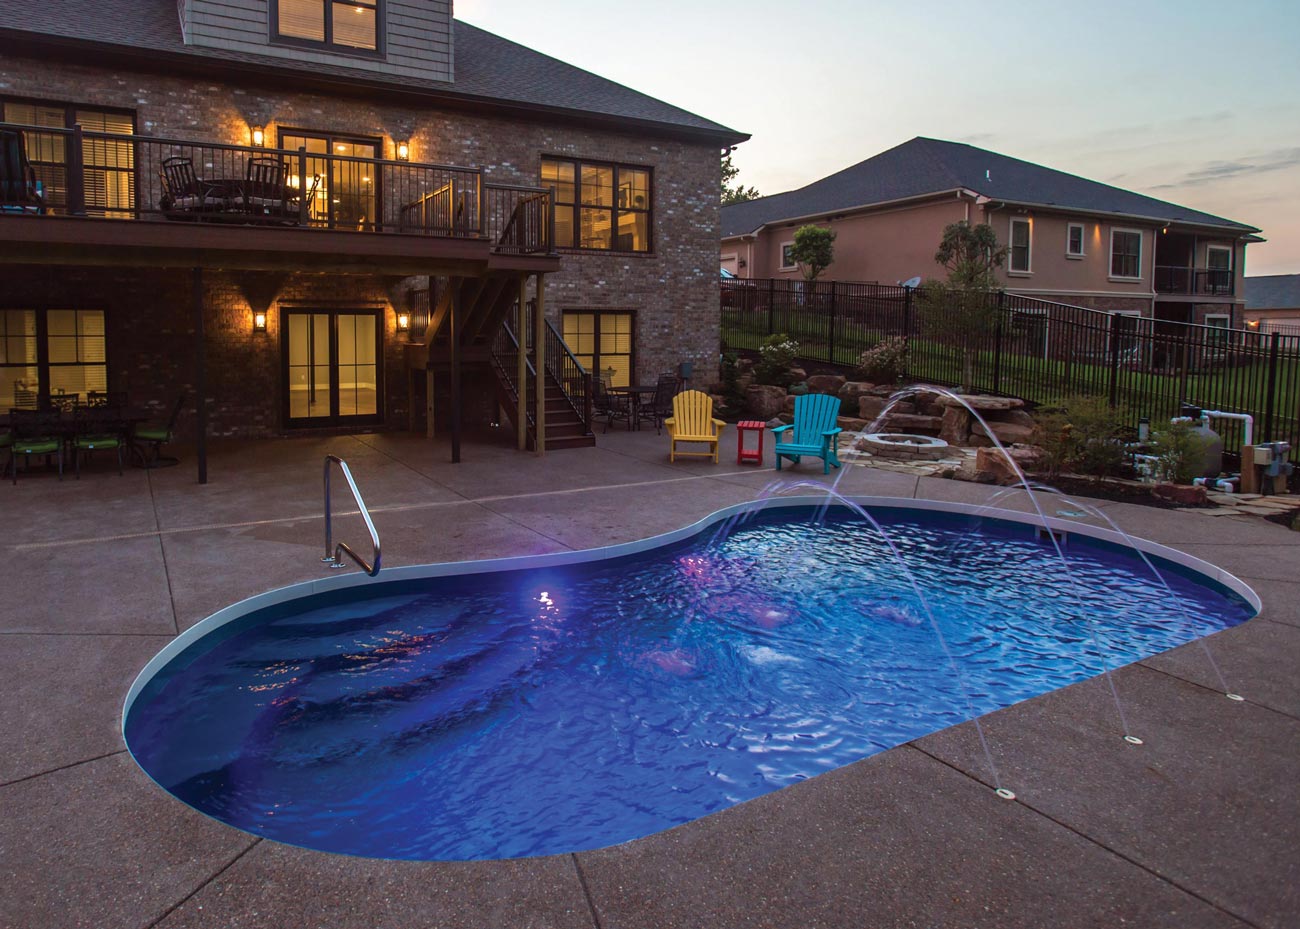 A residential backyard at dusk featuring a kidney-shaped pool, a two-story house with lit windows, and colorful patio chairs on a paved surface.